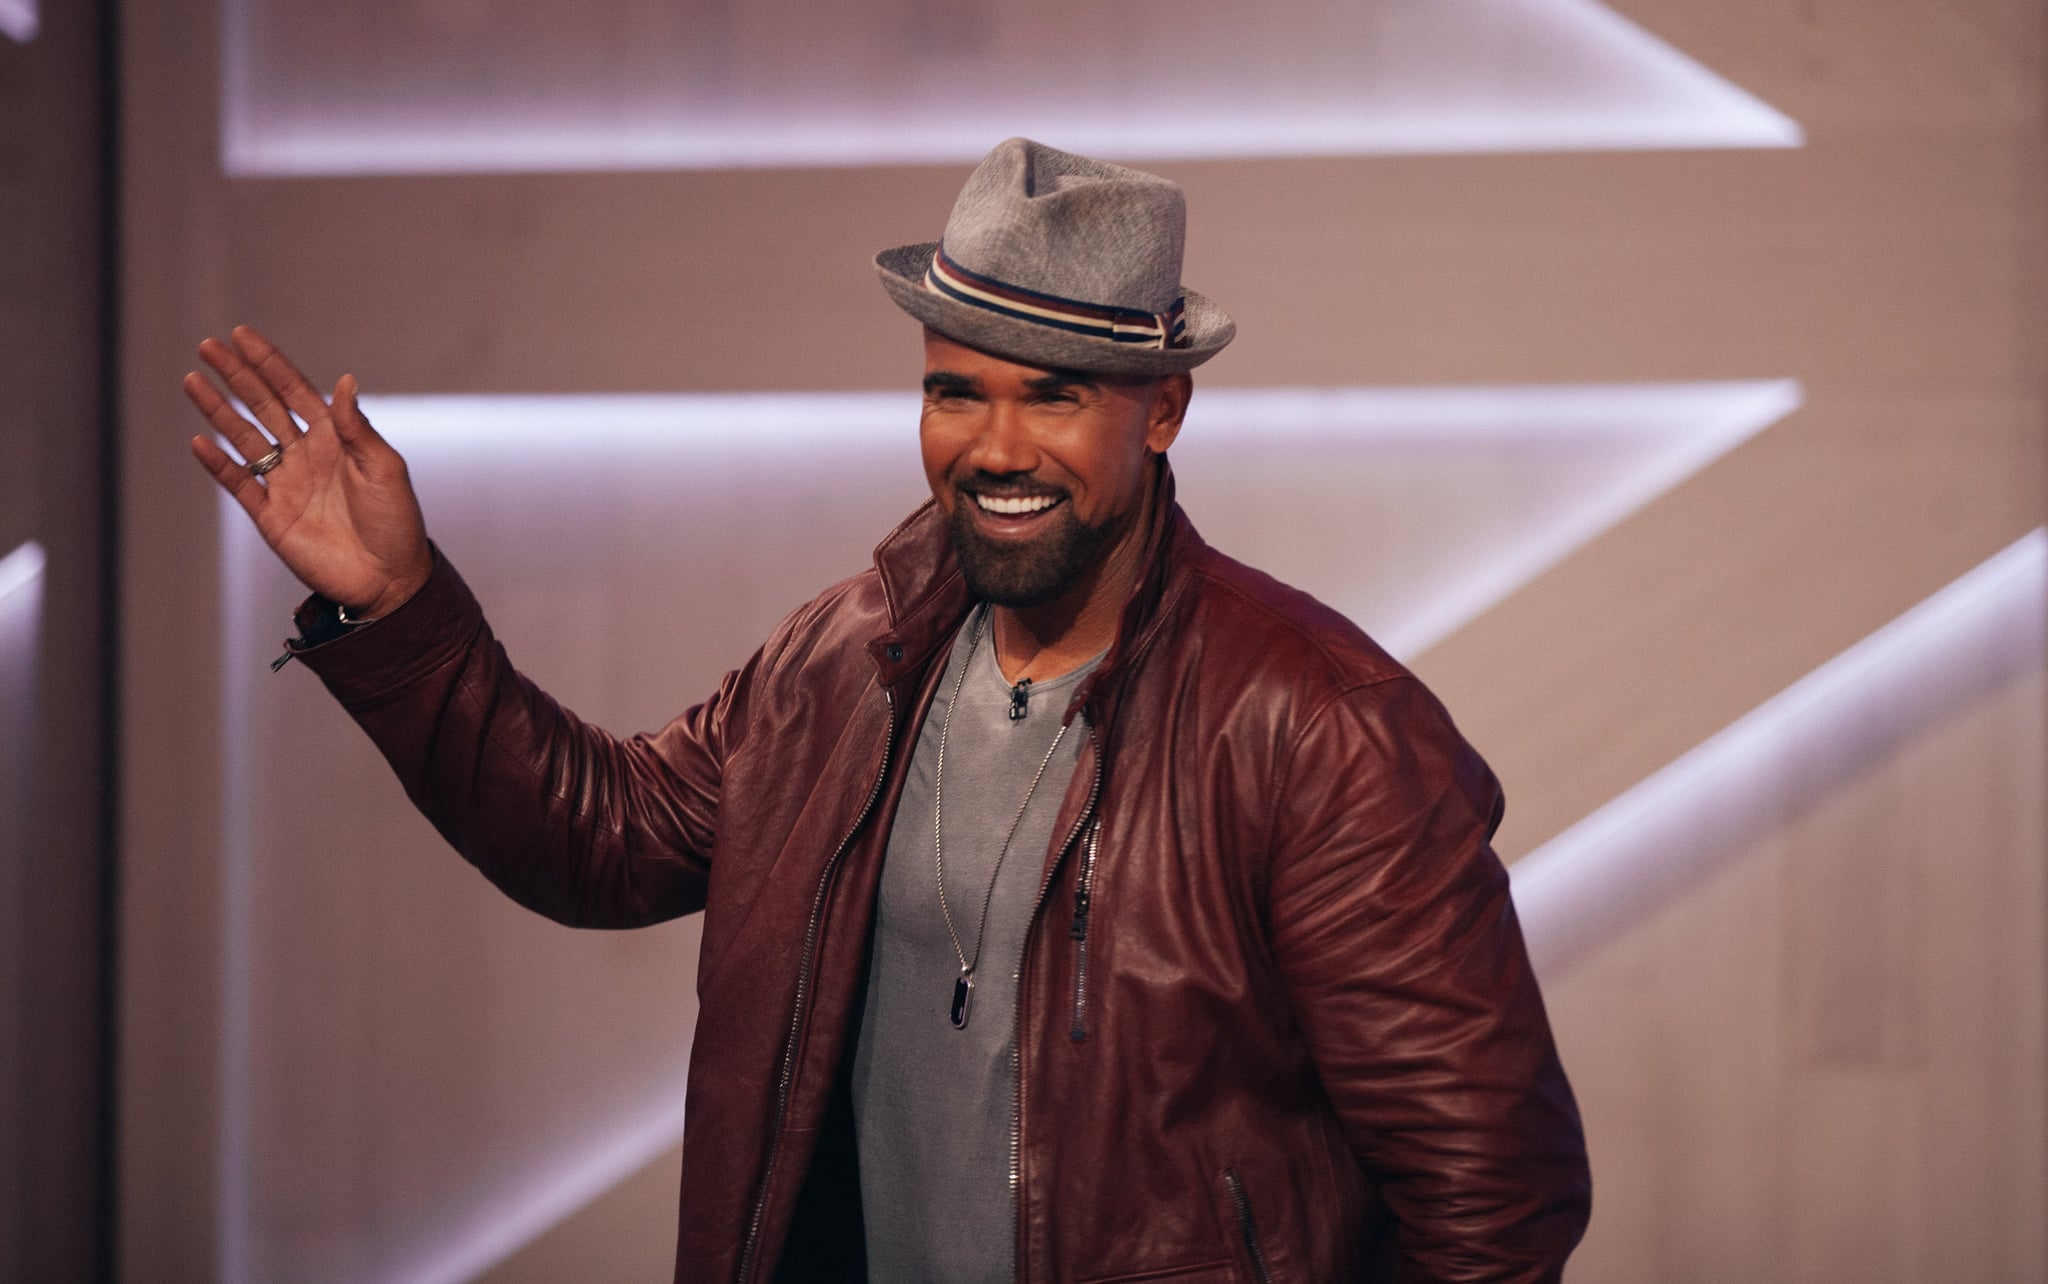 THE KELLY CLARKSON SHOW -- Episode 4043 -- Pictured: Shemar Moore -- (Photo by: Weiss Eubanks/NBCUniversal/NBCU Photo Bank)